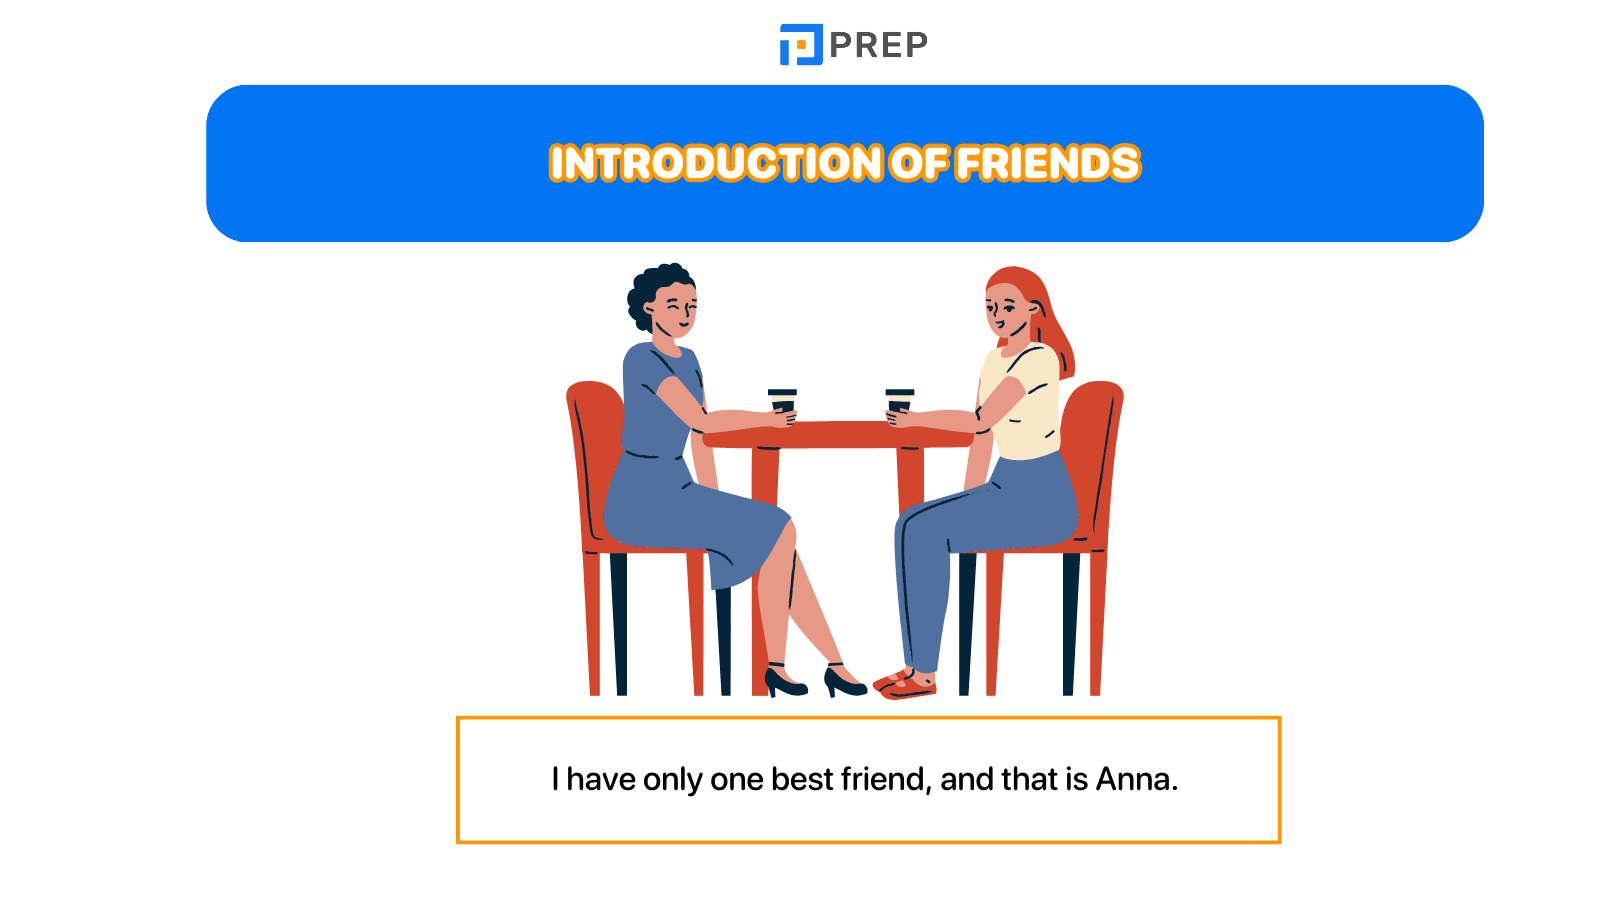 Introduction of friends